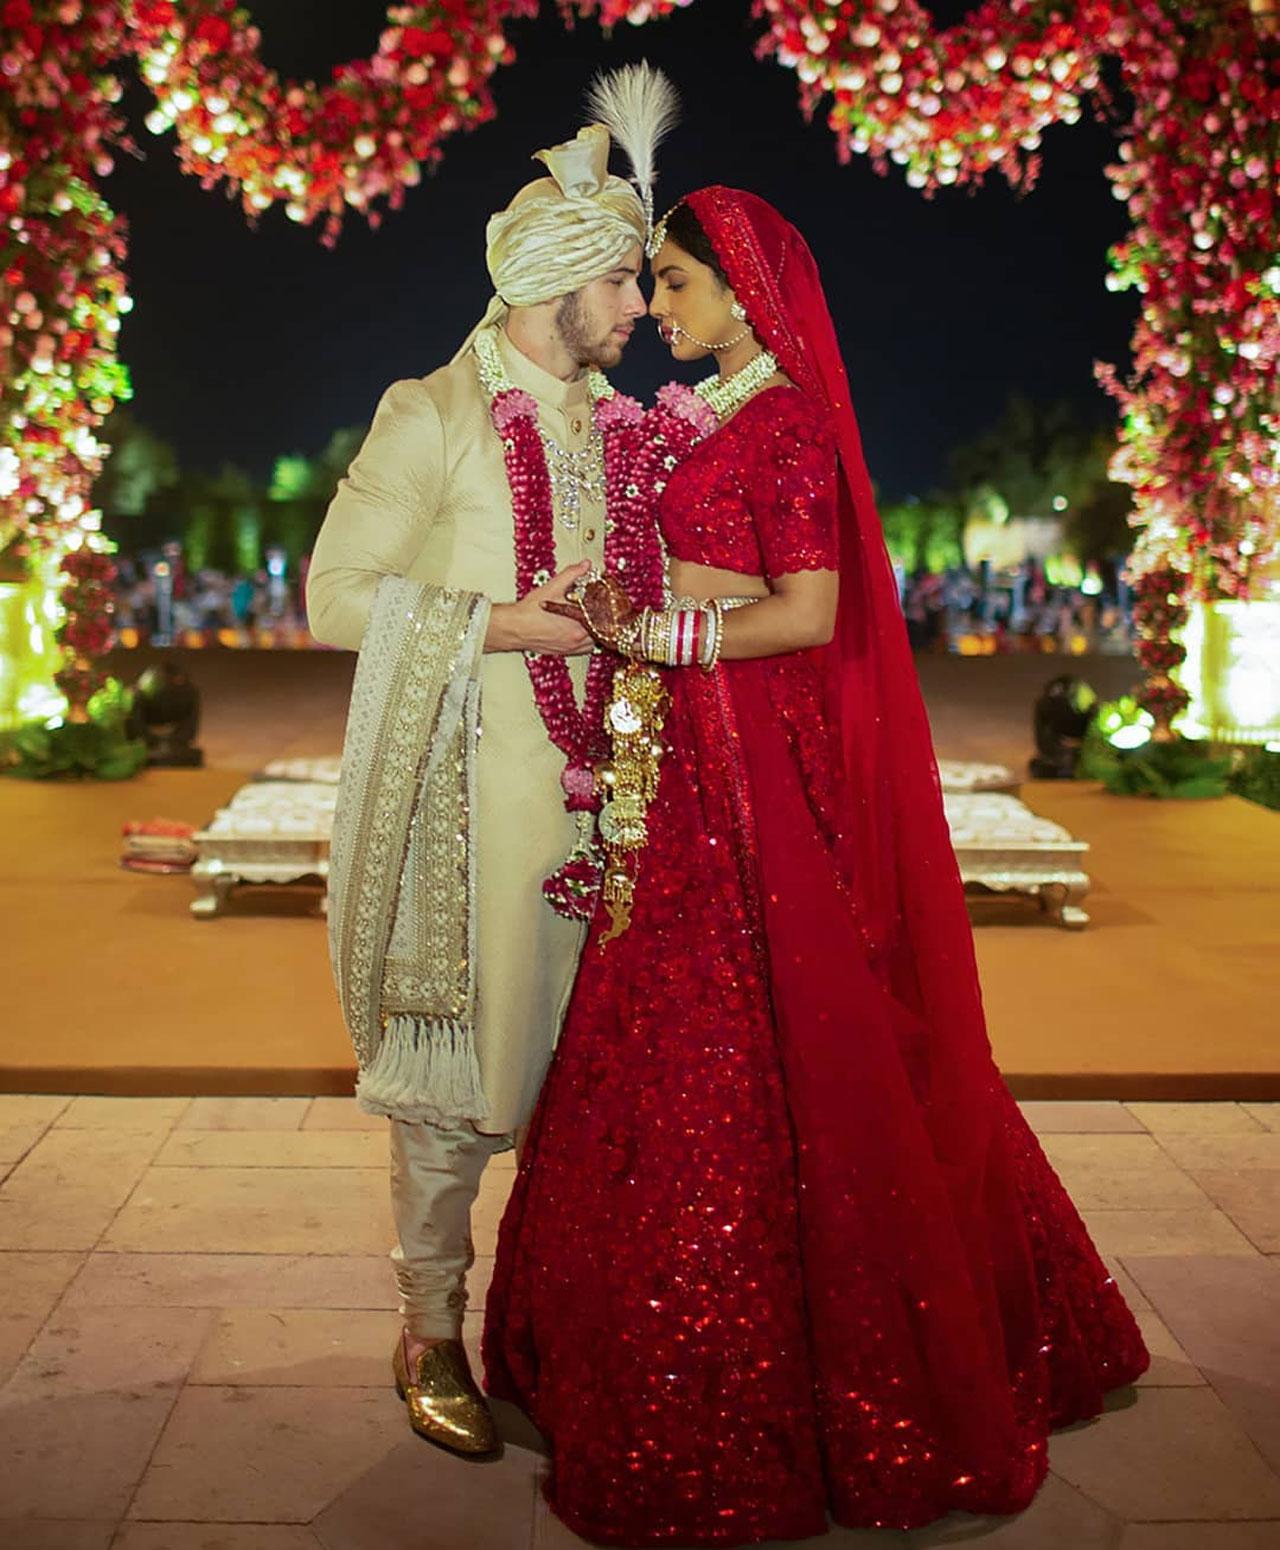 Priyanka Chopra and Nick Jonas tied the knot on December 1, 2018 at the Umaid Bhawan Palace in Jodhpur. The bride carried her red lehenga with aplomb whereas the groom nailed his golden Sharwani. (Picture Courtesy: Official Instagram Account-Priyanka Chopra).